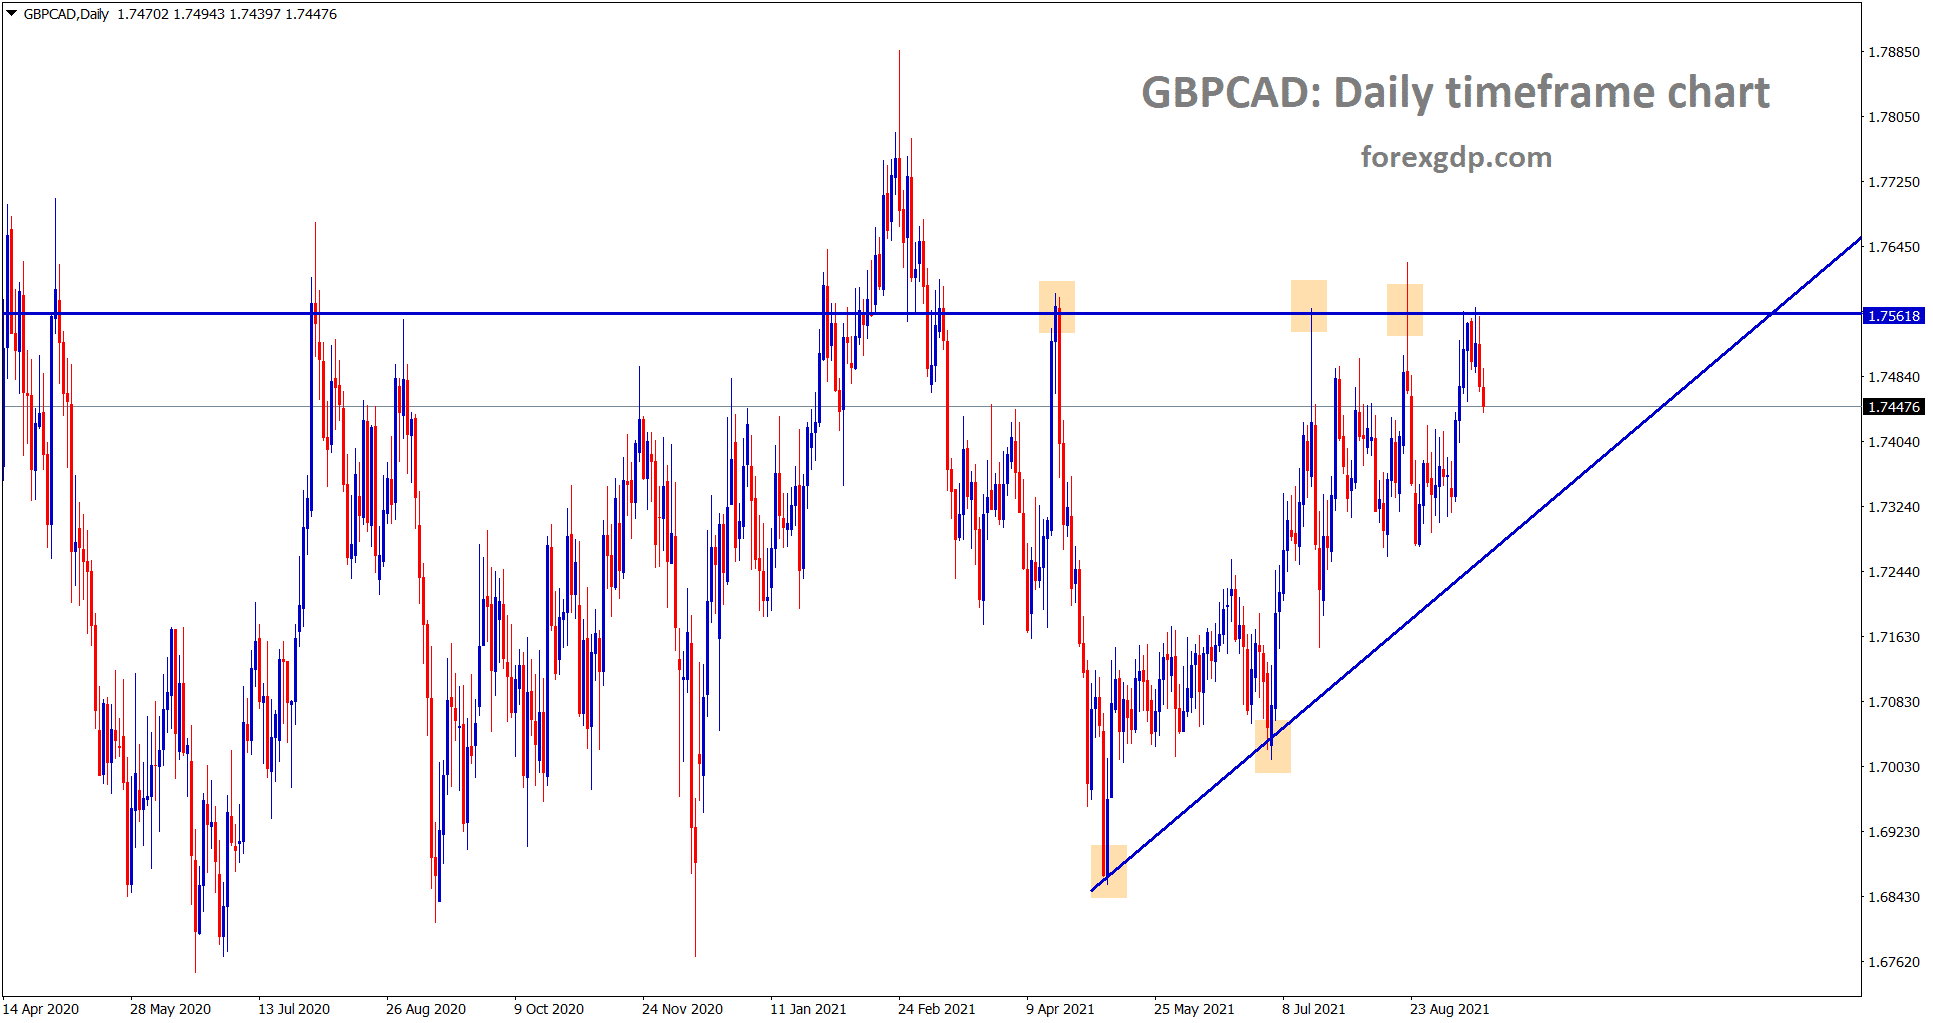 GBPCAD is making a correction from the resistance area